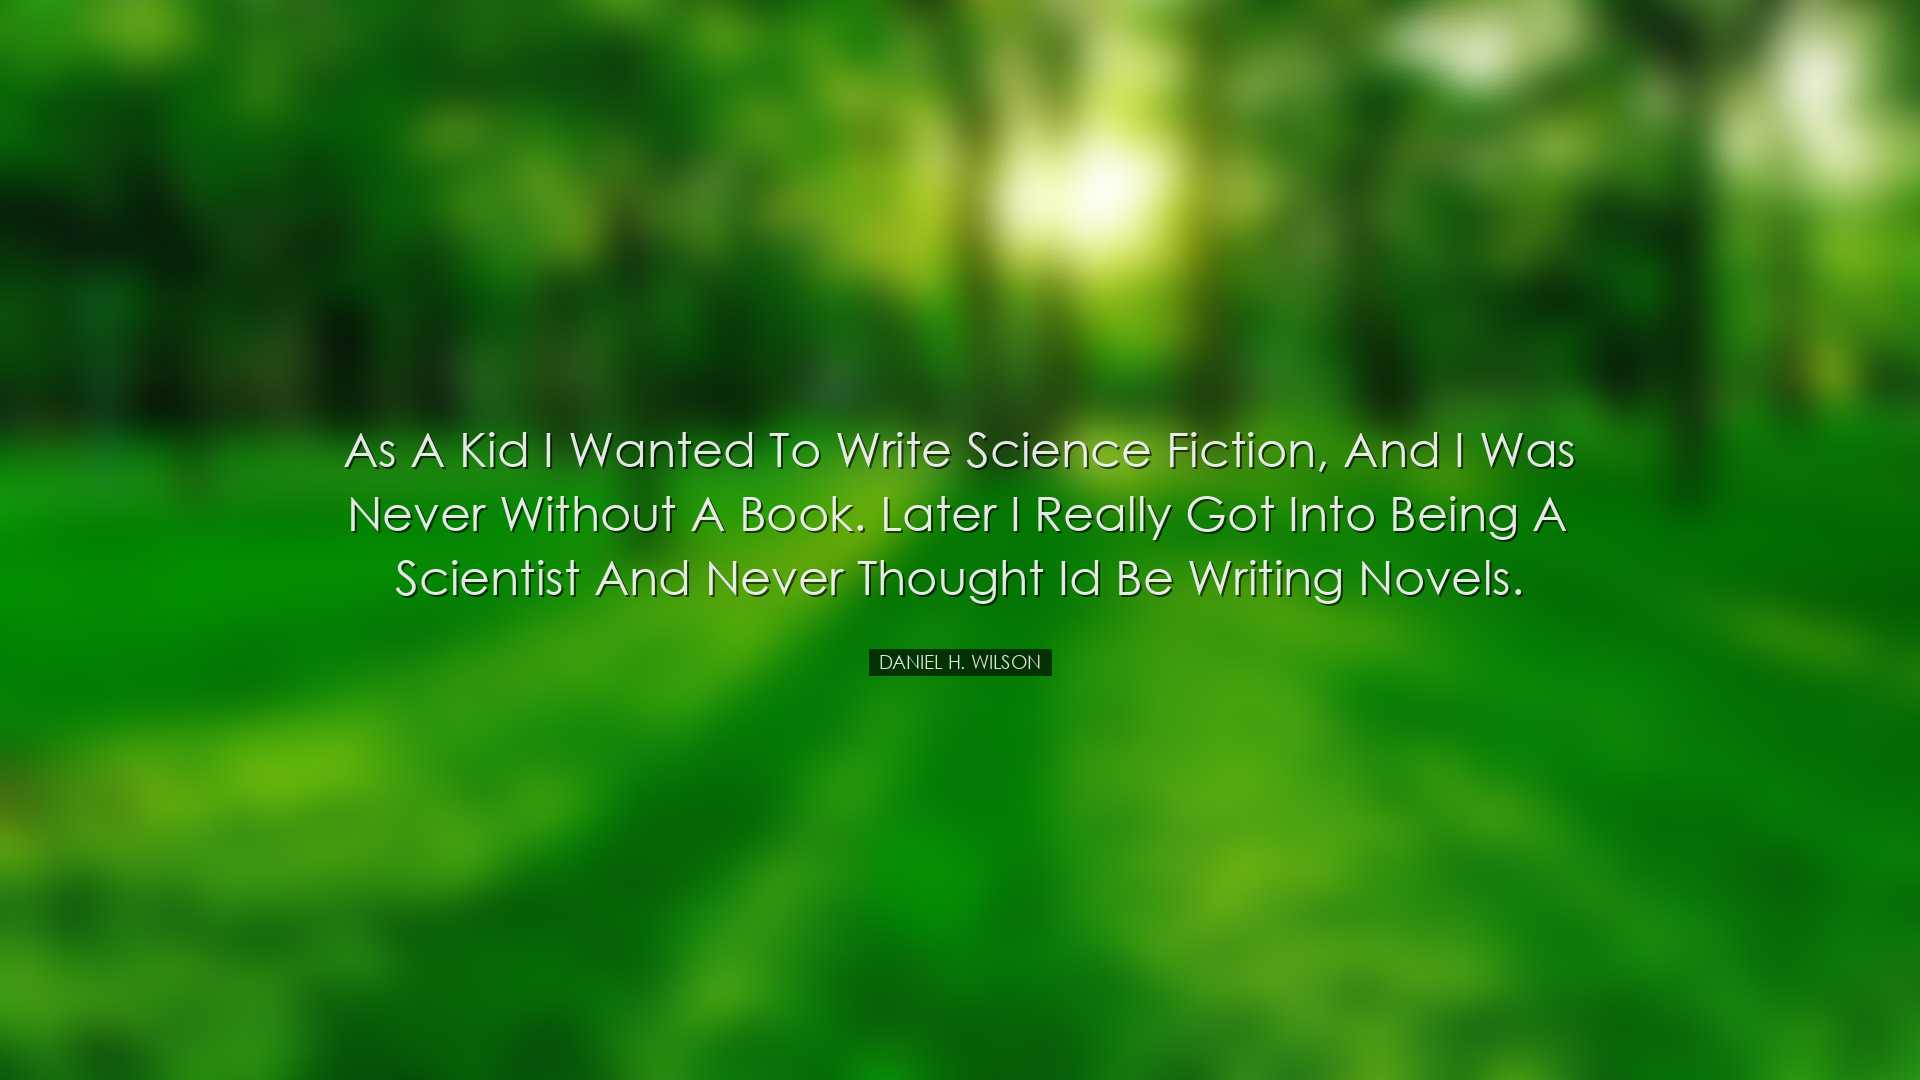 As a kid I wanted to write science fiction, and I was never withou